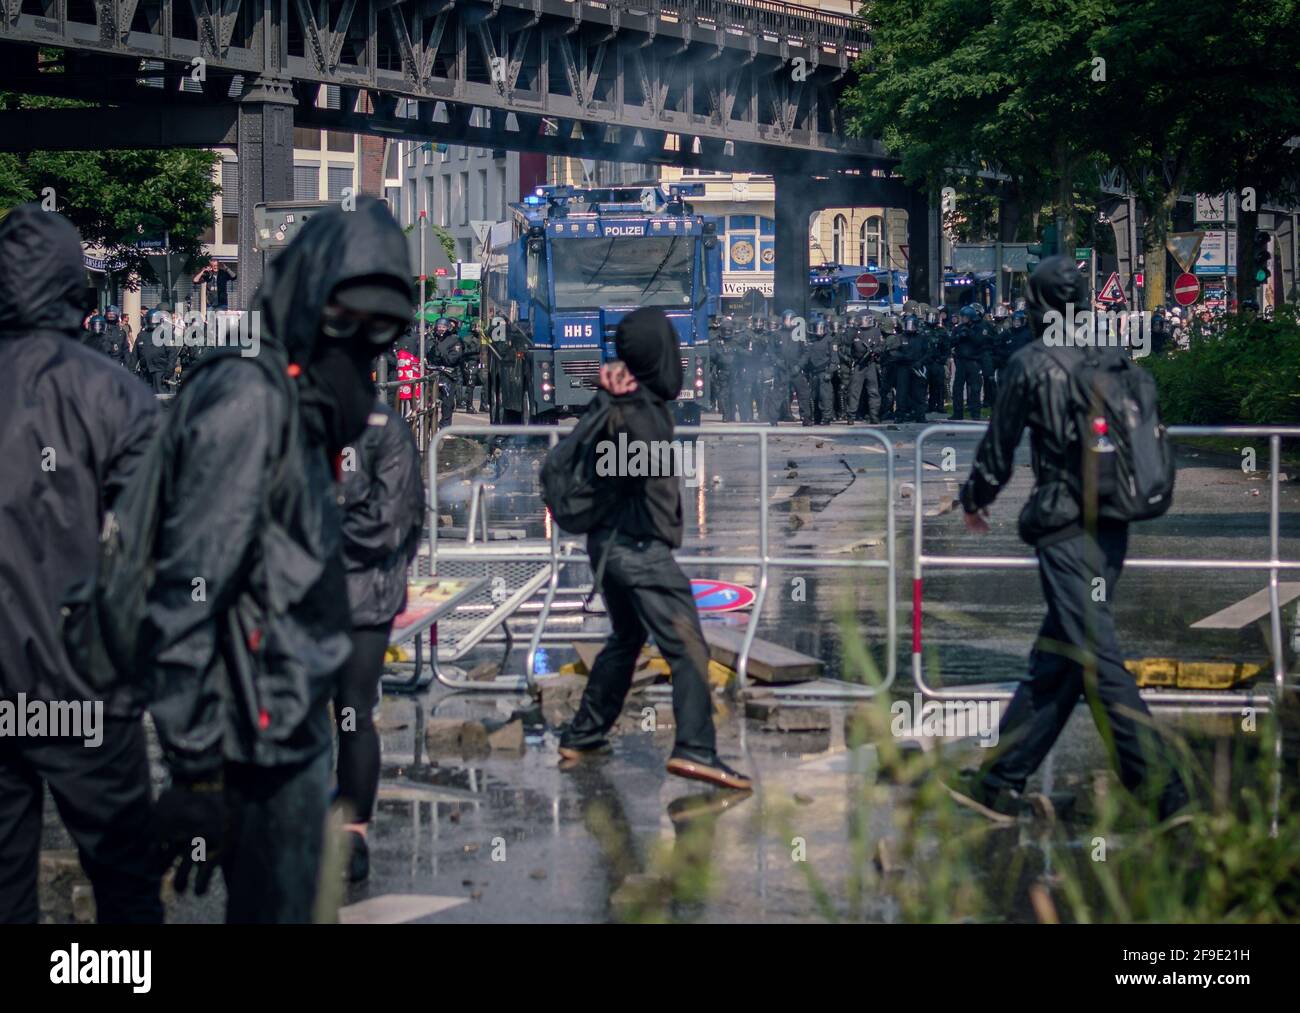 Landungsbruecken Hamburg - Germany July 7, 2017: Protesters throw stones on riot police during g20 summit clashes Stock Photo